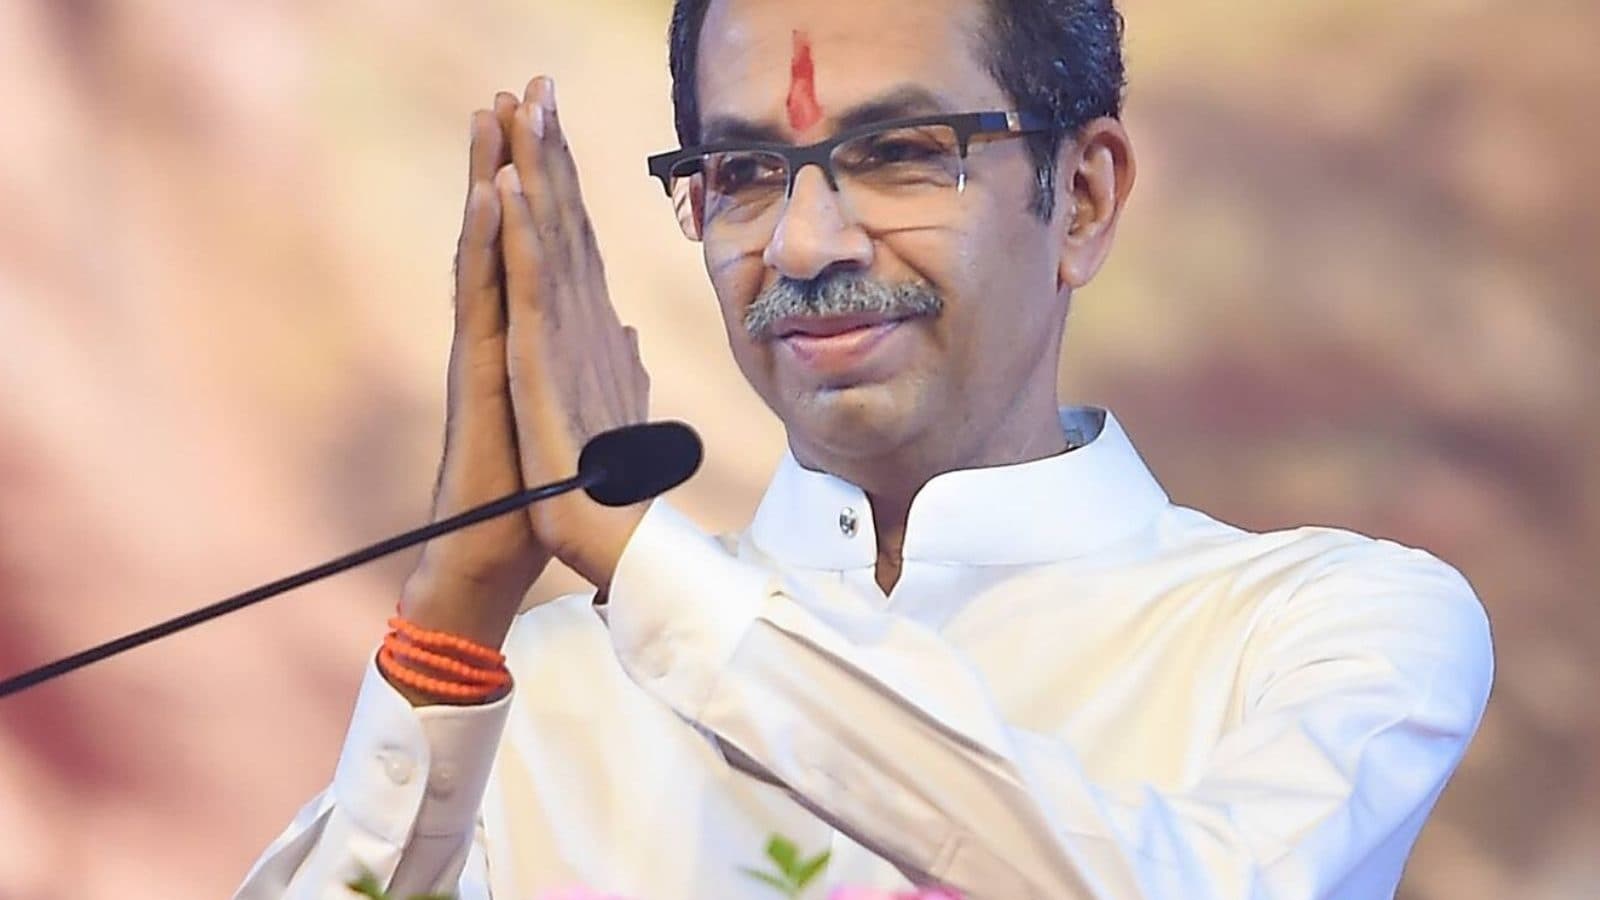 Uddhav Thackeray to Propose Trishul, Rising Sun, Flame Torch as Symbols after EC’s Freeze on Bow and Arrow